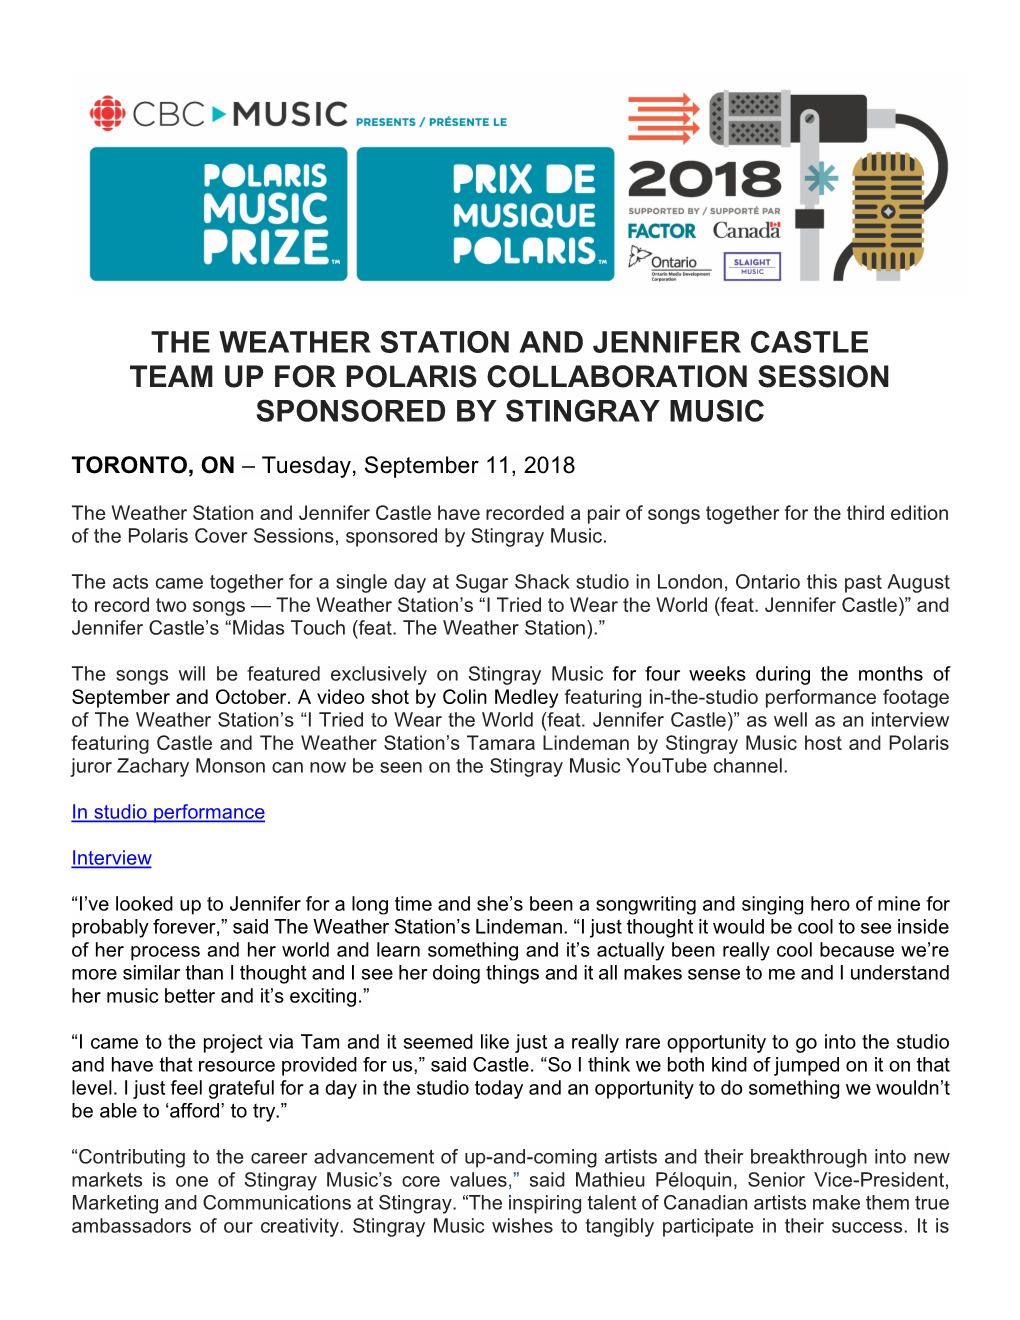 The Weather Station and Jennifer Castle Team up for Polaris Collaboration Session Sponsored by Stingray Music